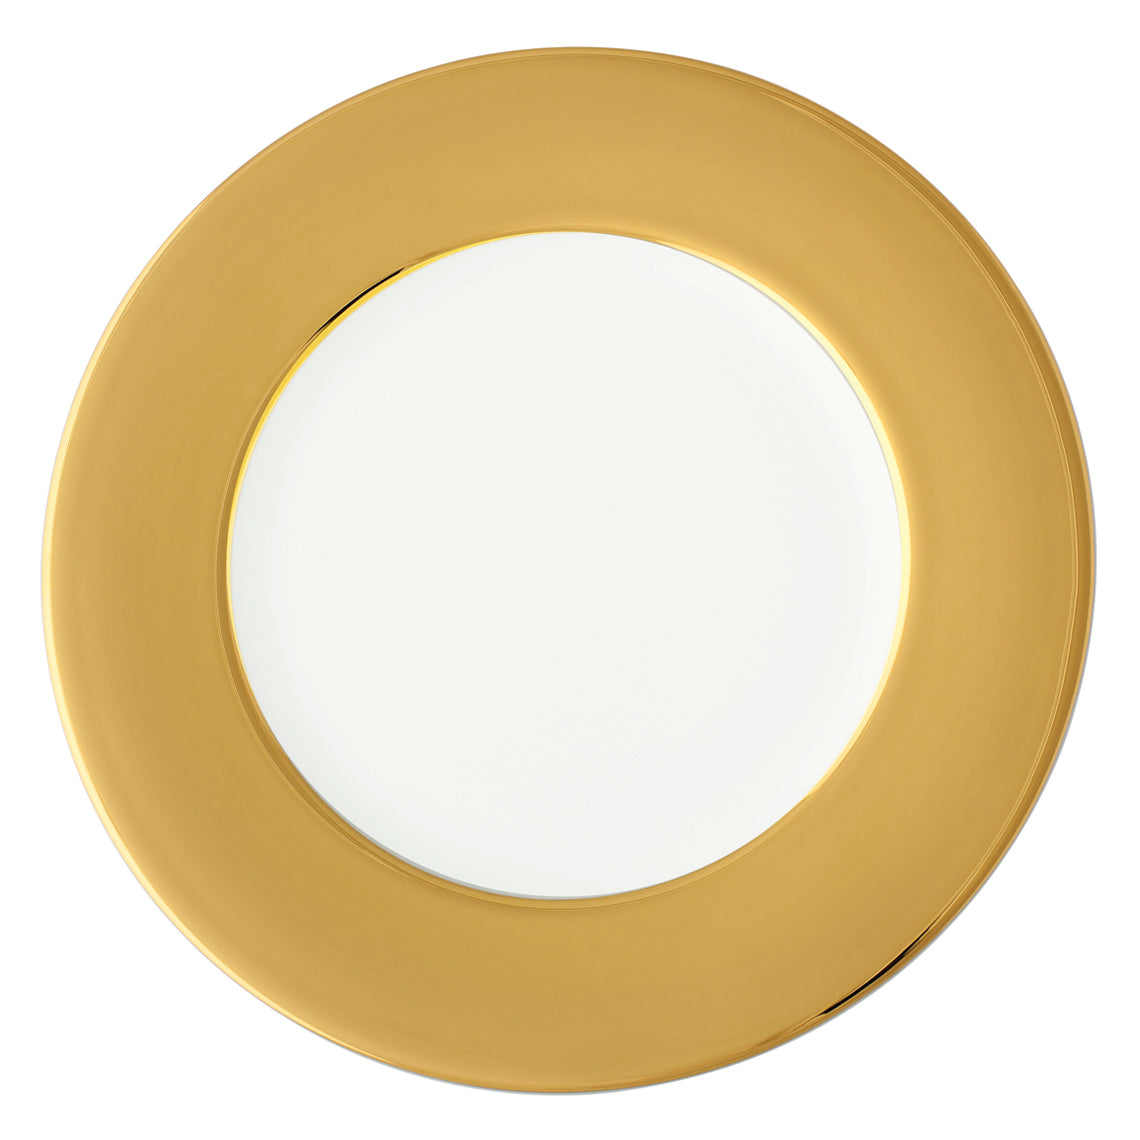 Prouna Diana Gold Charger Plate / Round Platter White Background Photo